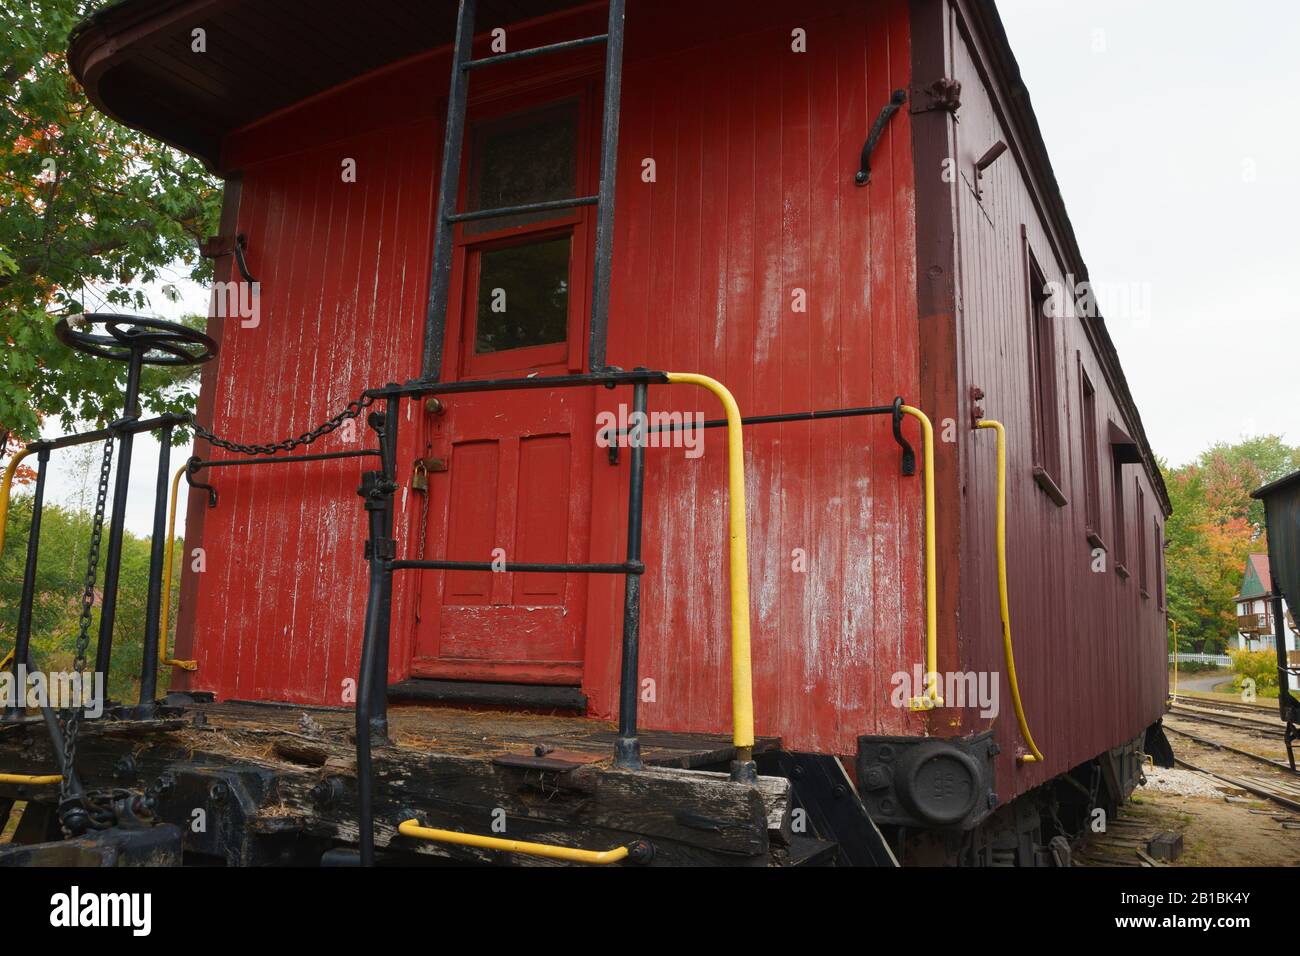 Rear view of a vintage red caboose on display in North Conway, New Hampshire, USA. Stock Photo